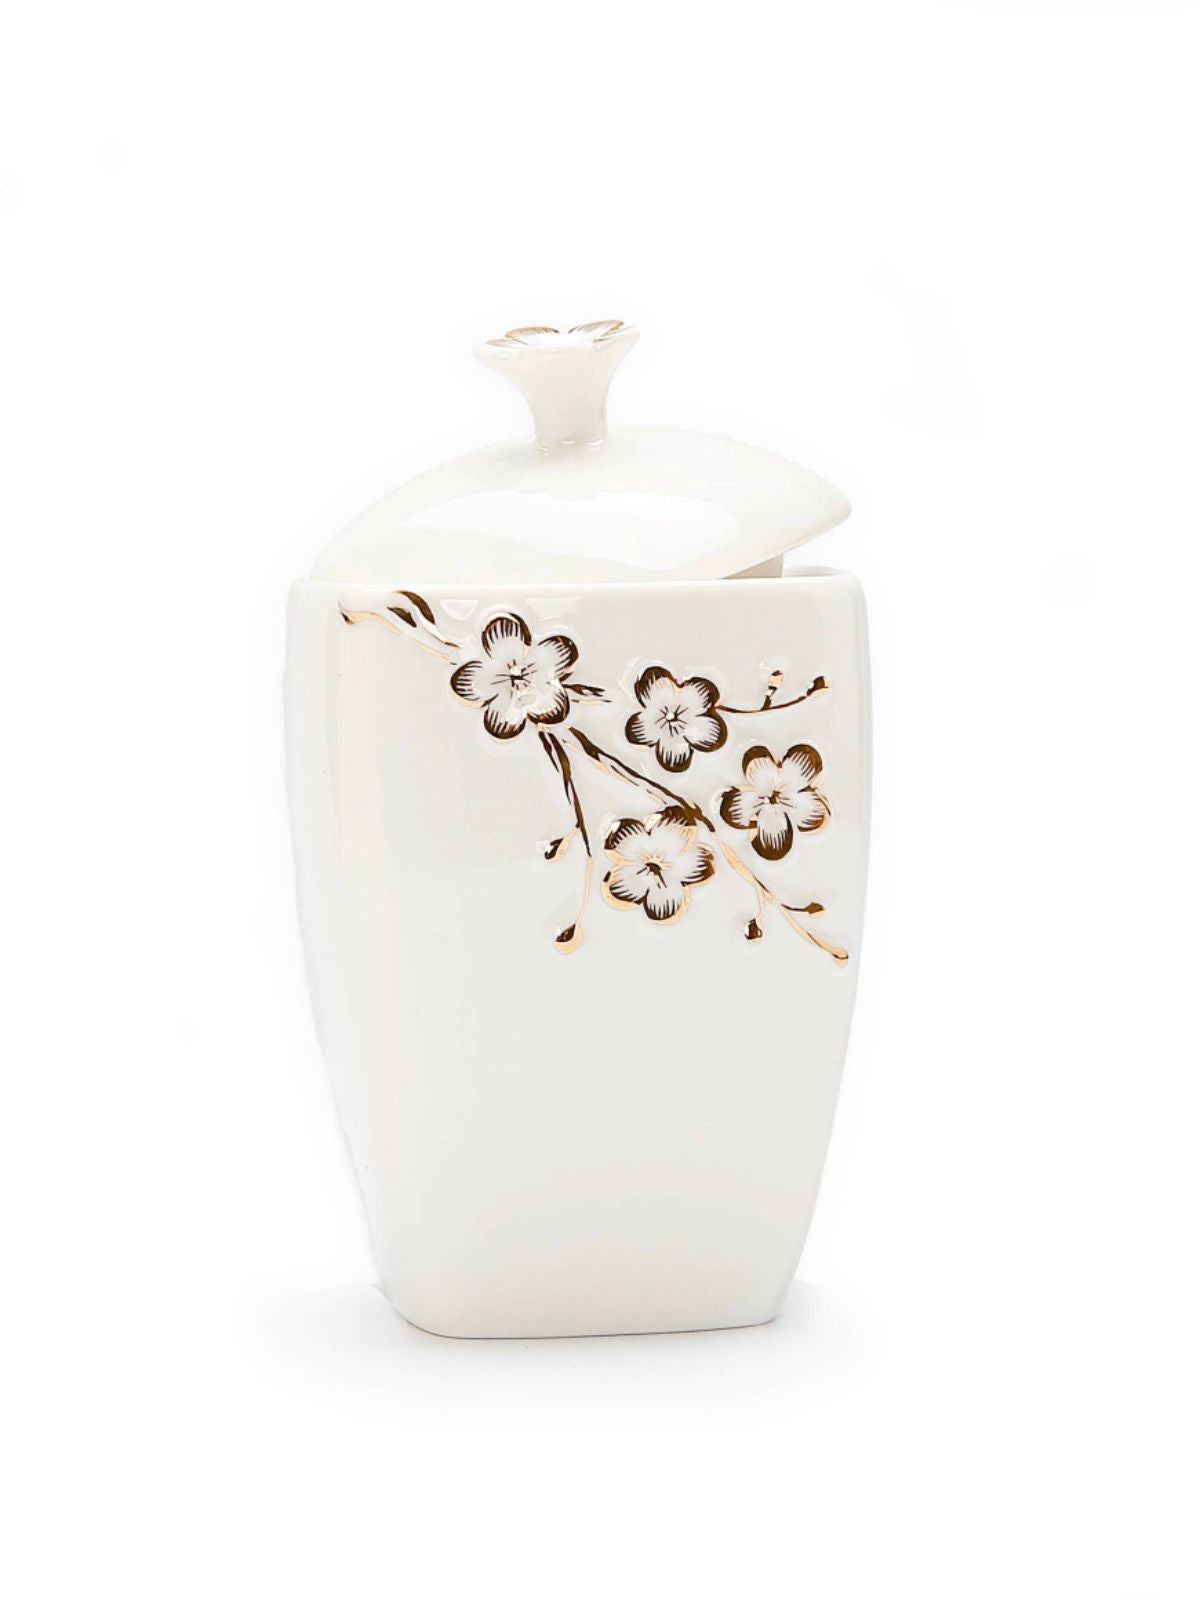 This covered sugar bowl features a white color with sparkling gold accents and a beautiful flower design. An exquisitely drawn floral adorns each piece with sparkling gold accents that make this bowl a truly gorgeous gift range.  